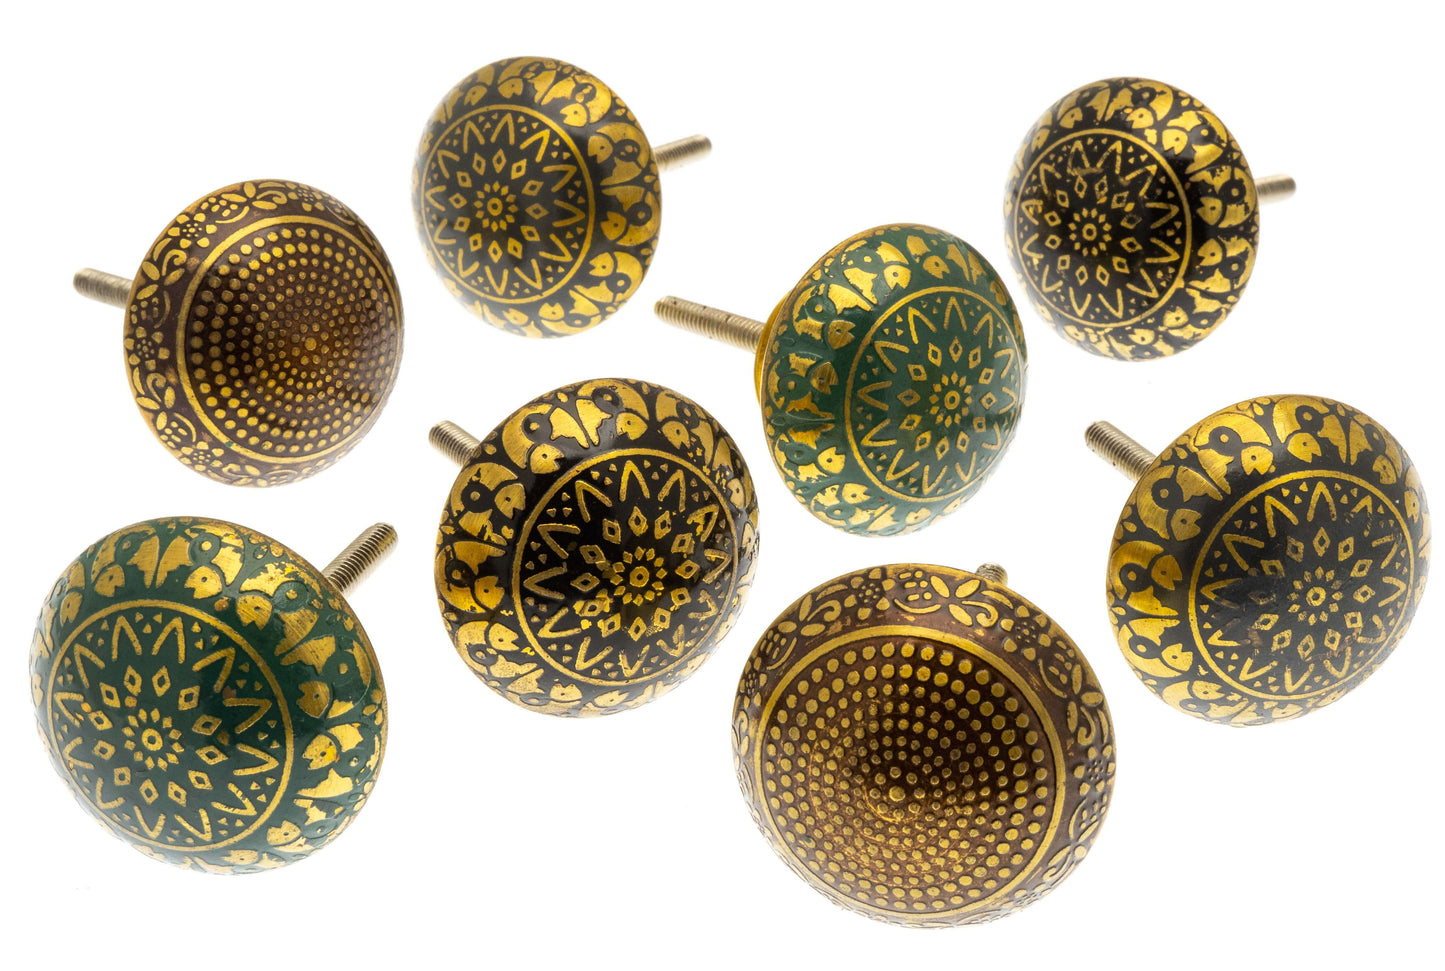 Etched Patterned Brass Dome Moroccan Style Cupboard Knob Selection of 8